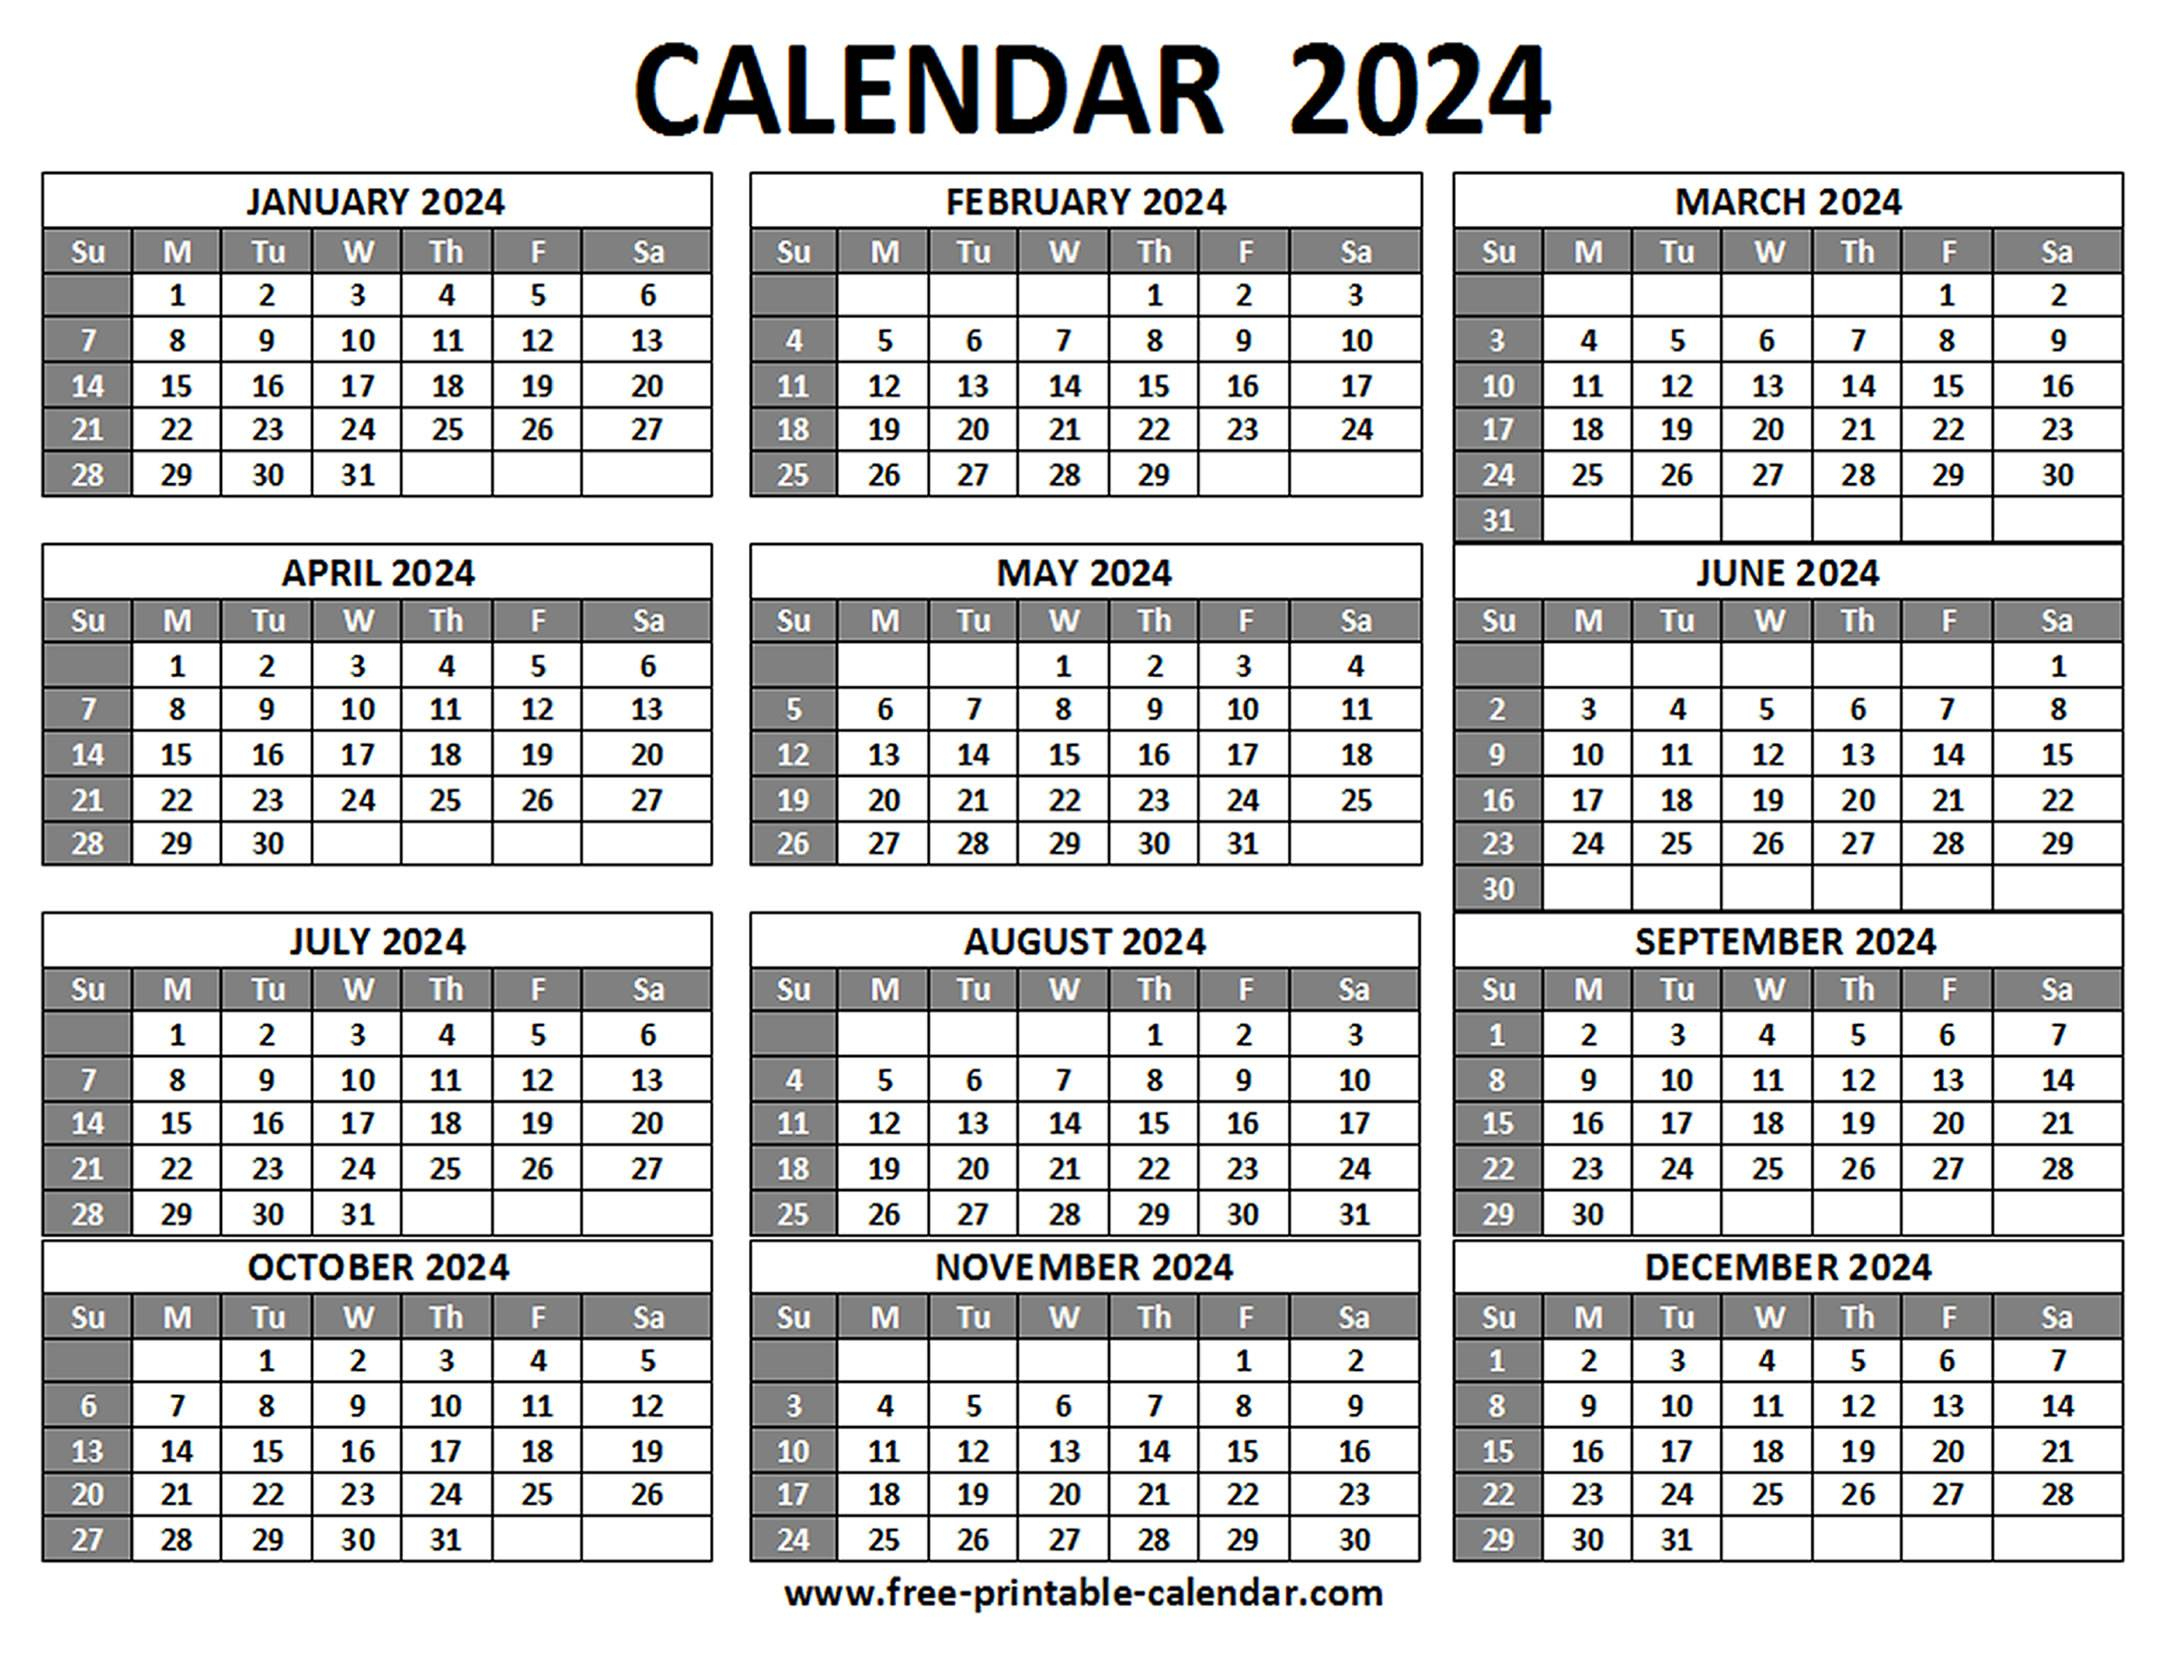 Printable 2024 Calendar - Free-Printable-Calendar | Printable 2024 Calendar One Page